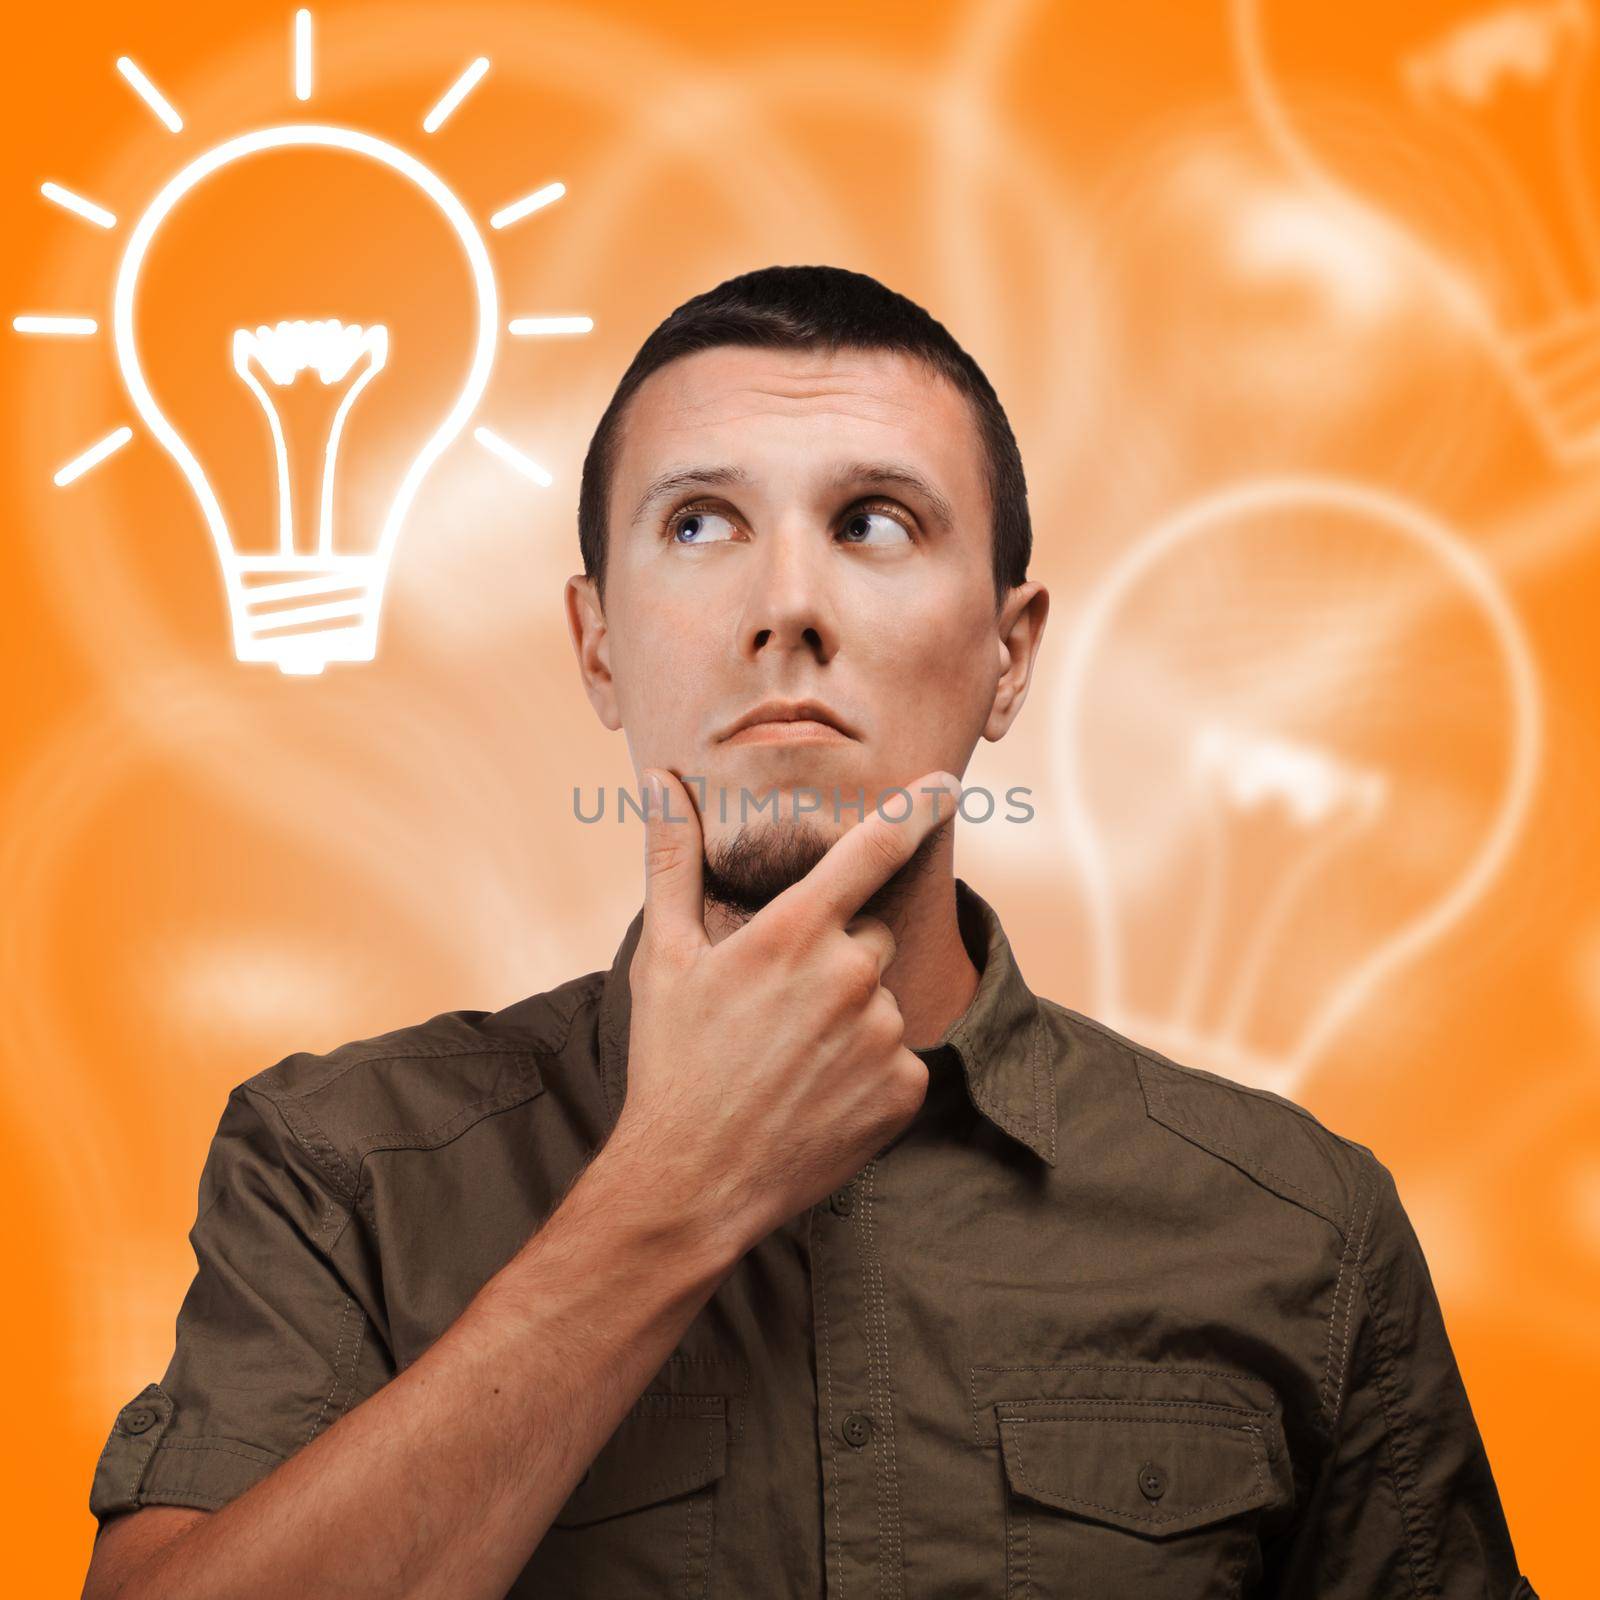 Young man thinking on an orange background with bulbs